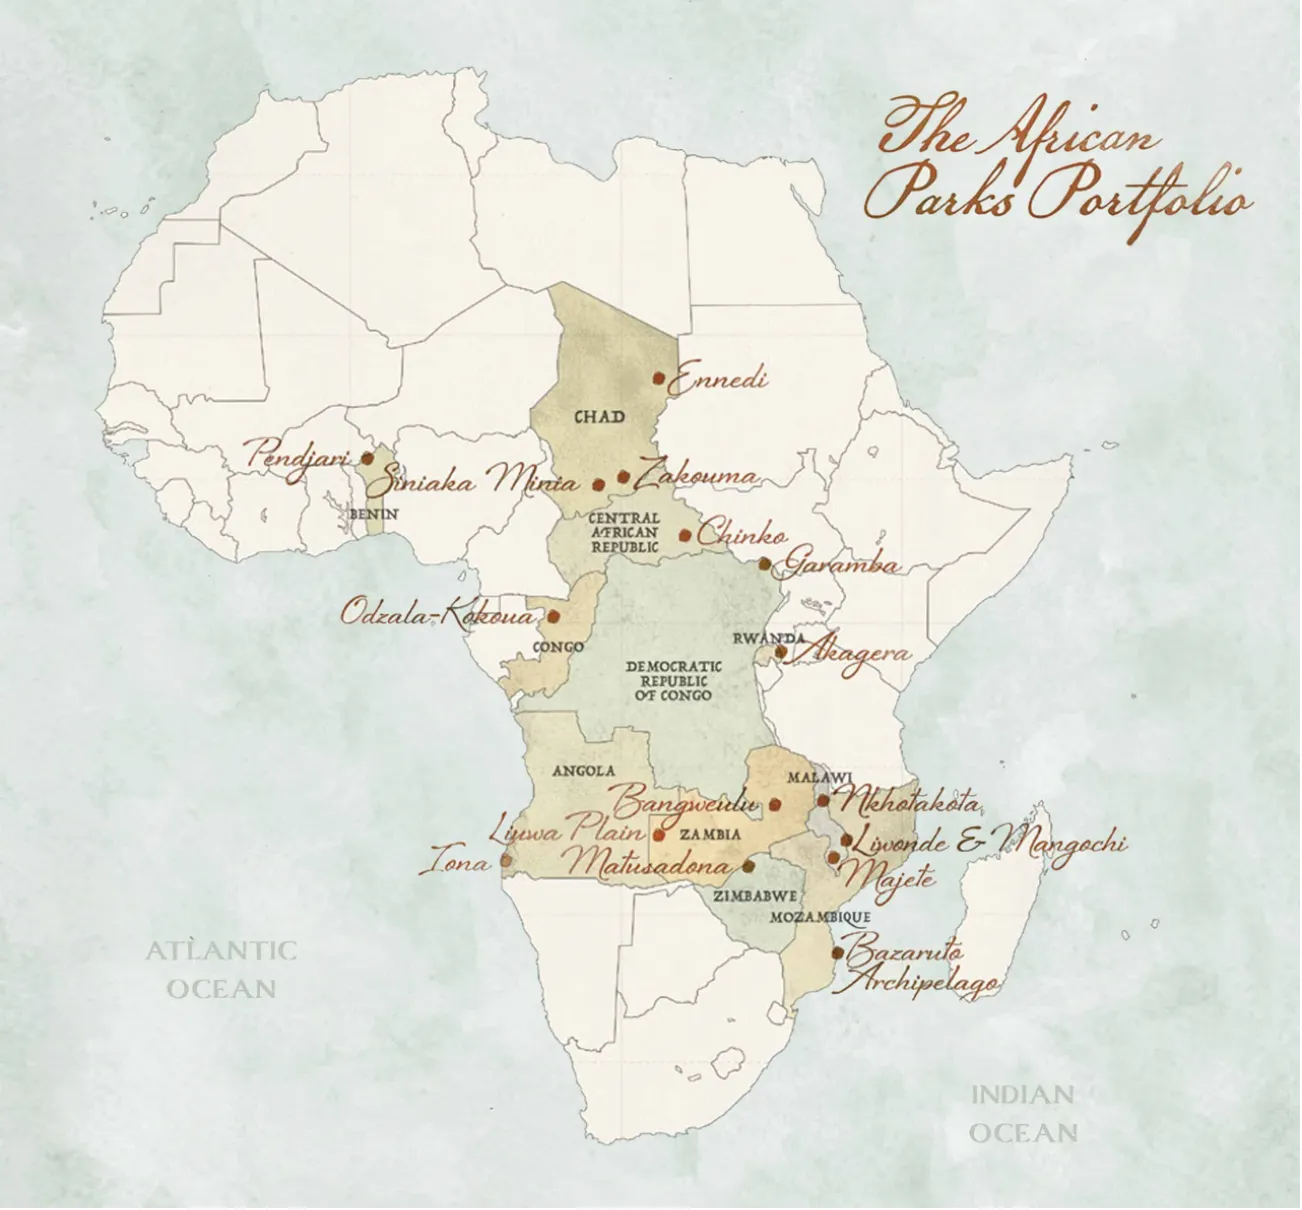 African Parks Map